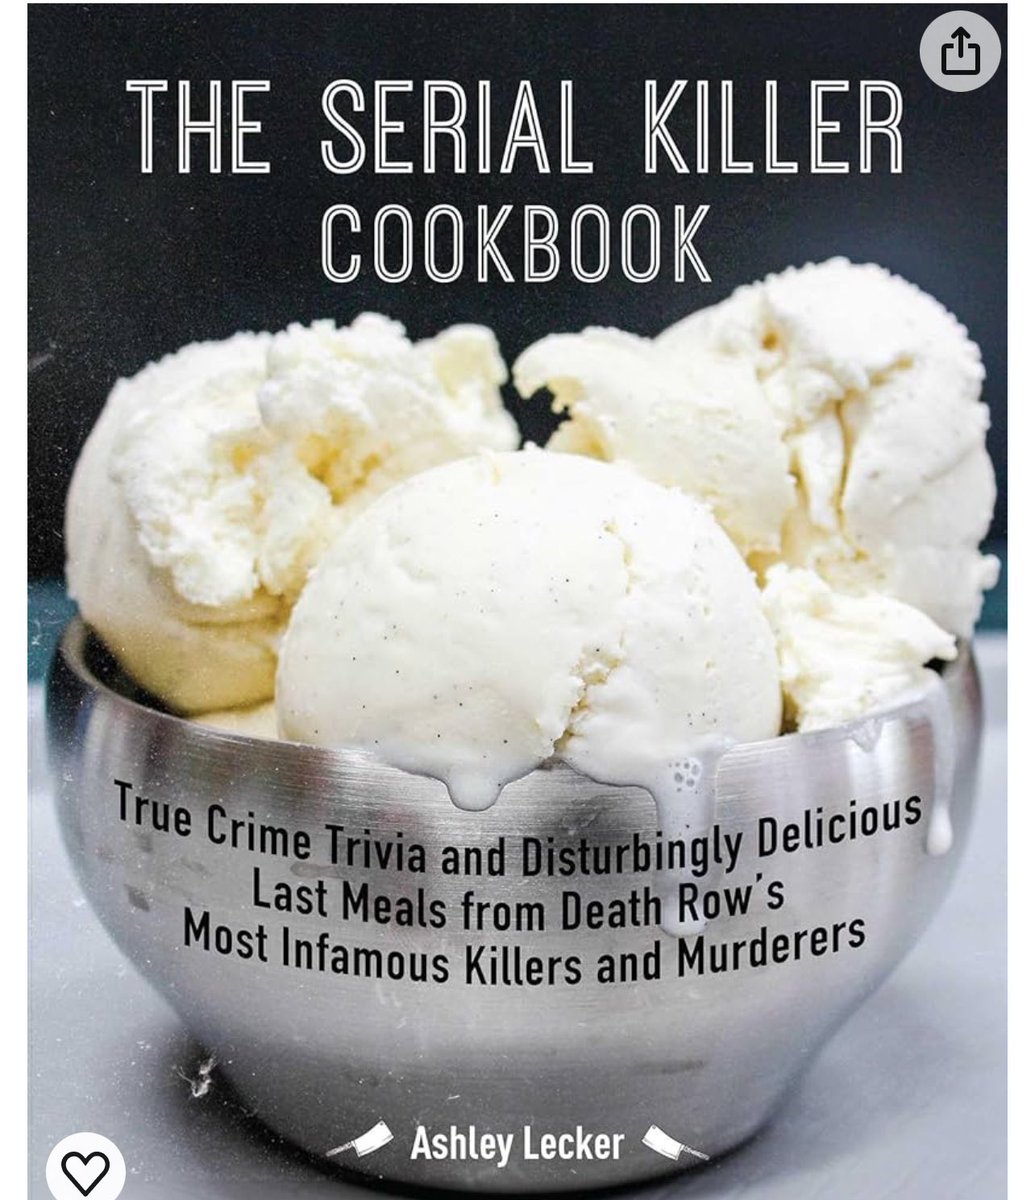 What’s the serial killer recipe for ice cream lol 1. Get a bowl 2. Fill it with ice cream 3. Serial kill?